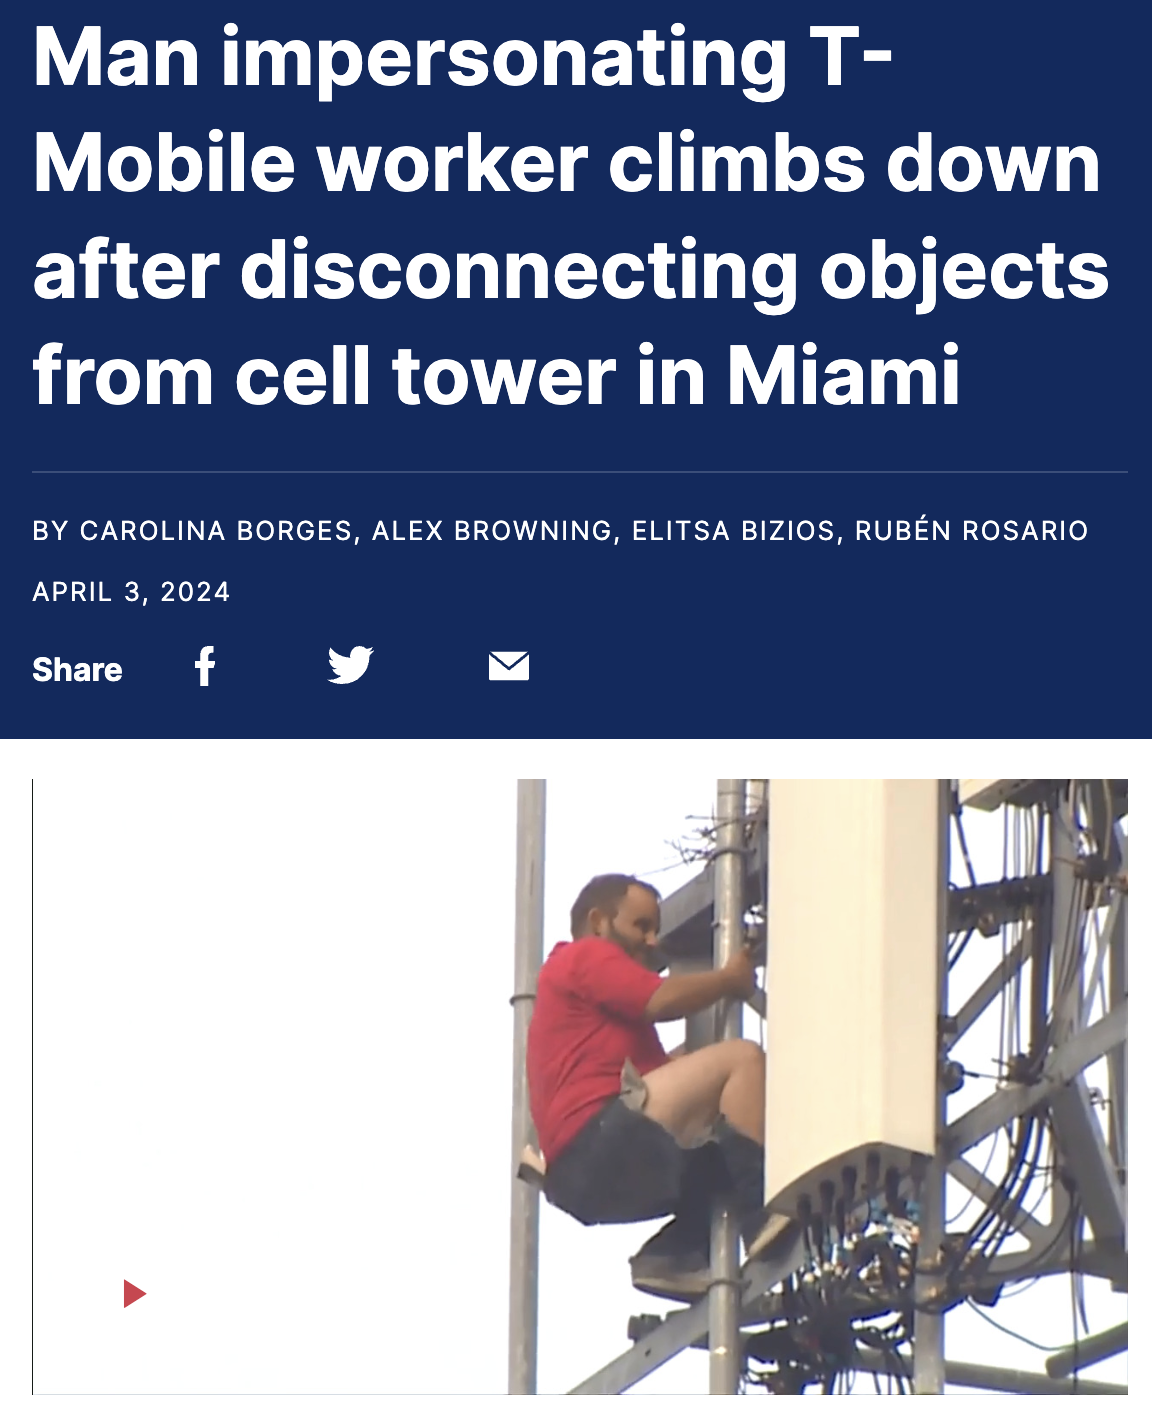 sitting - Man impersonating T Mobile worker climbs down after disconnecting objects from cell tower in Miami By Carolina Borges, Alex Browning, Elitsa Bizios, Rubn Rosario f y